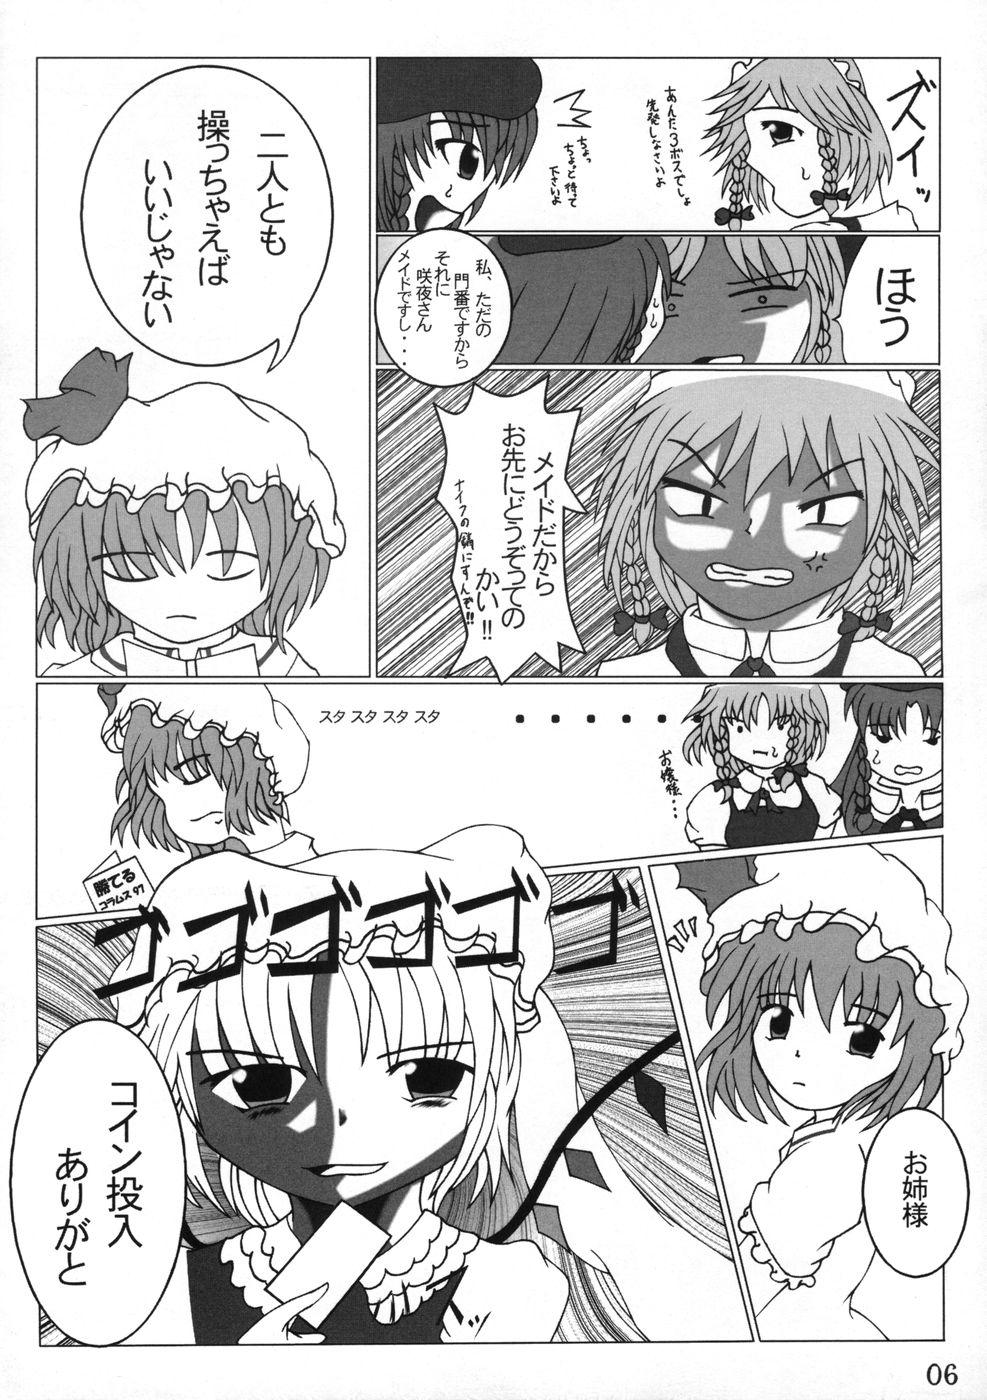 Porno Amateur 業創りし風 - Touhou project Handsome - Page 6